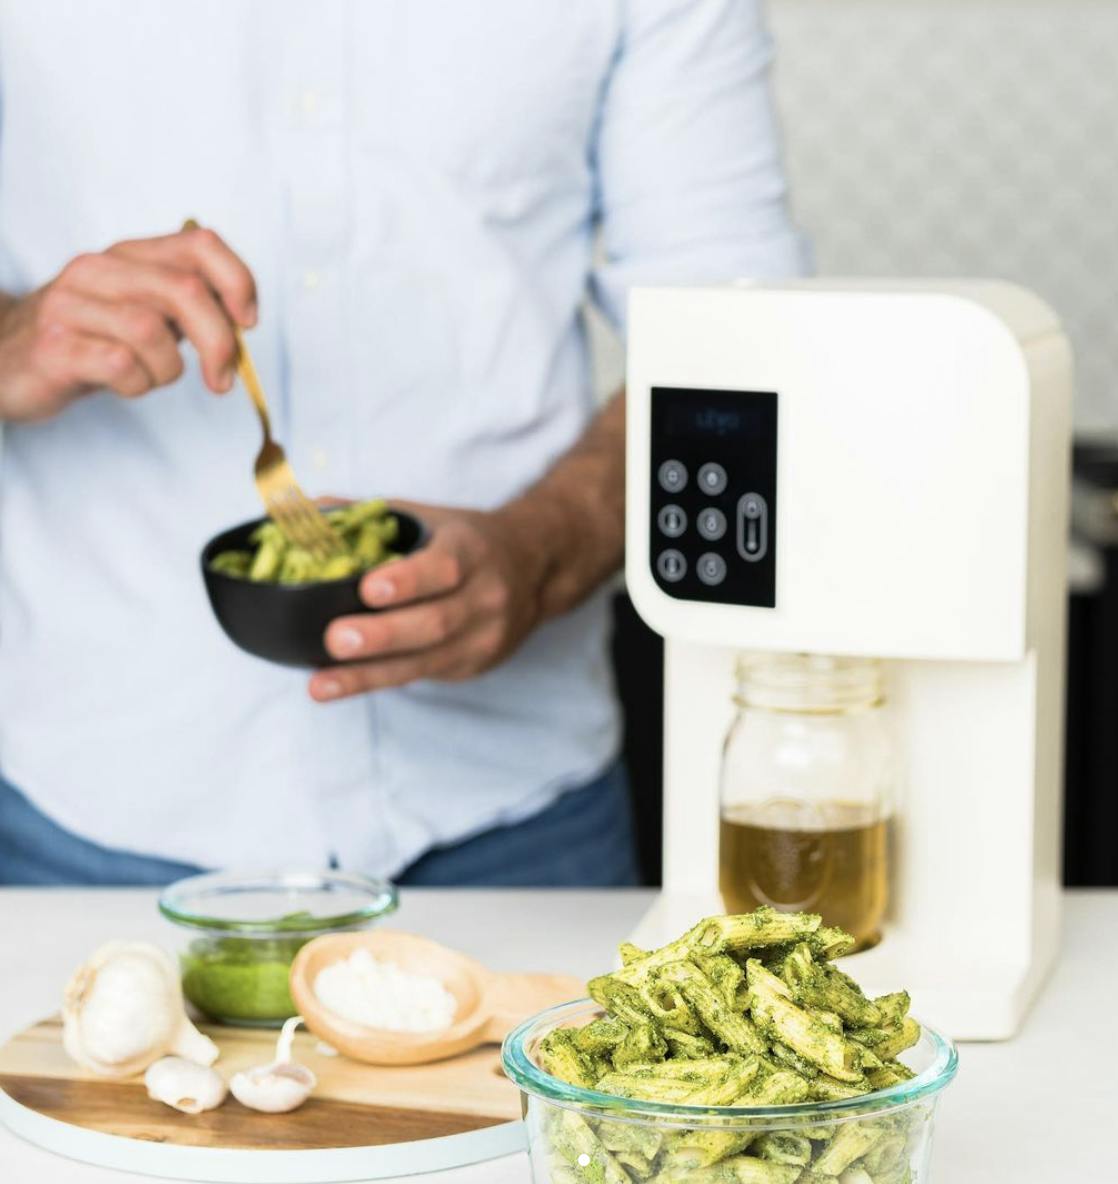 LEVO weed machine and cannabutter maker sits on a counter as someone prepares infused pesto pasta.